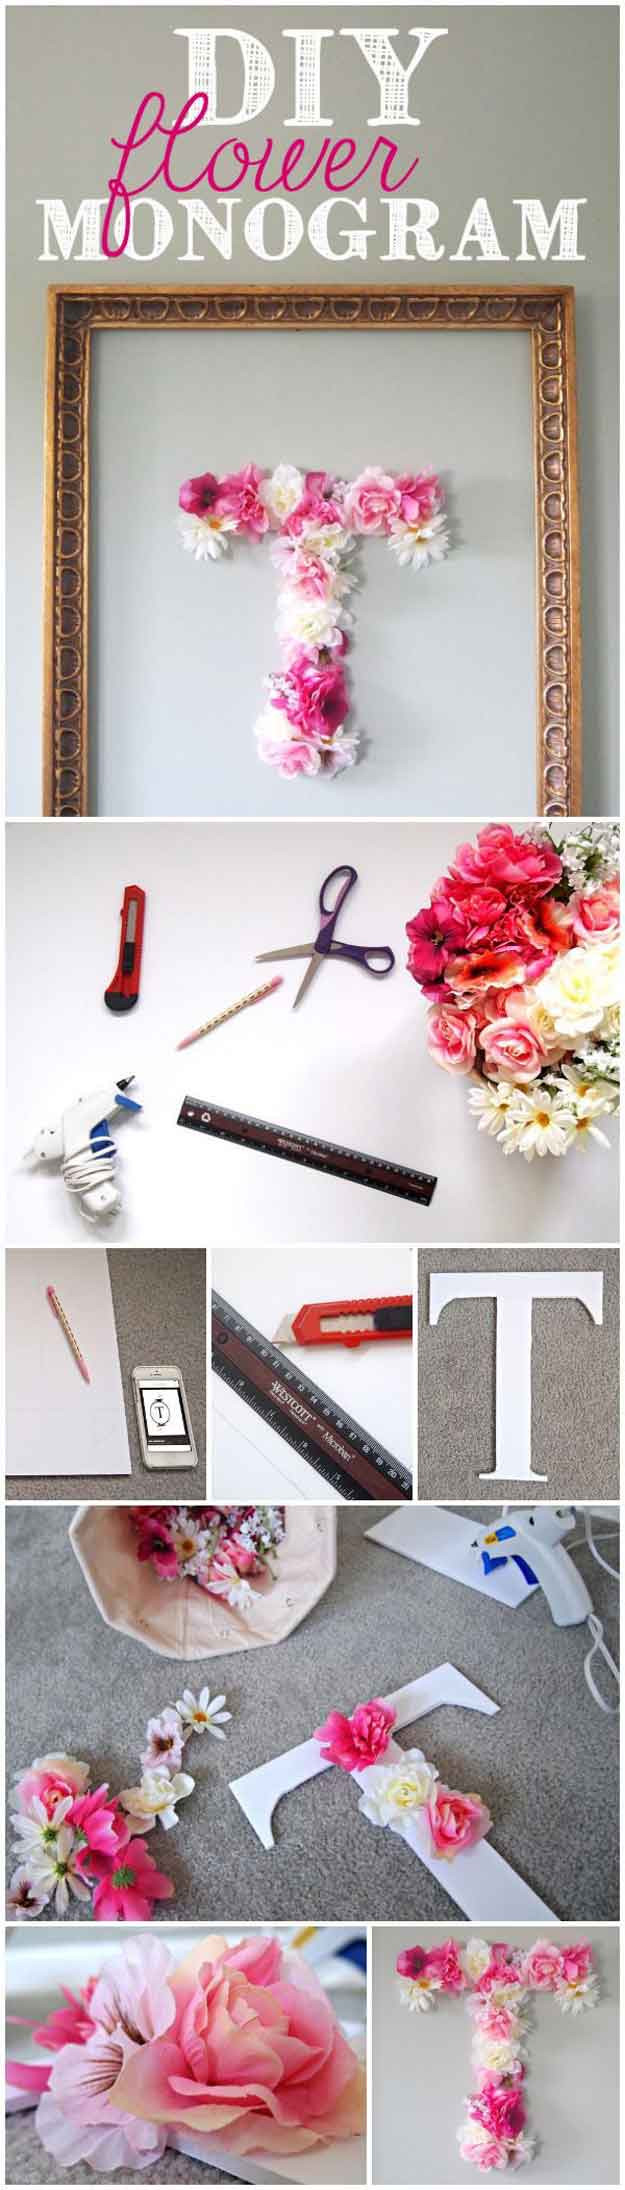 DIY Room Decorating Ideas For Teenagers
 DIY Projects for Teens Bedroom DIY Ready